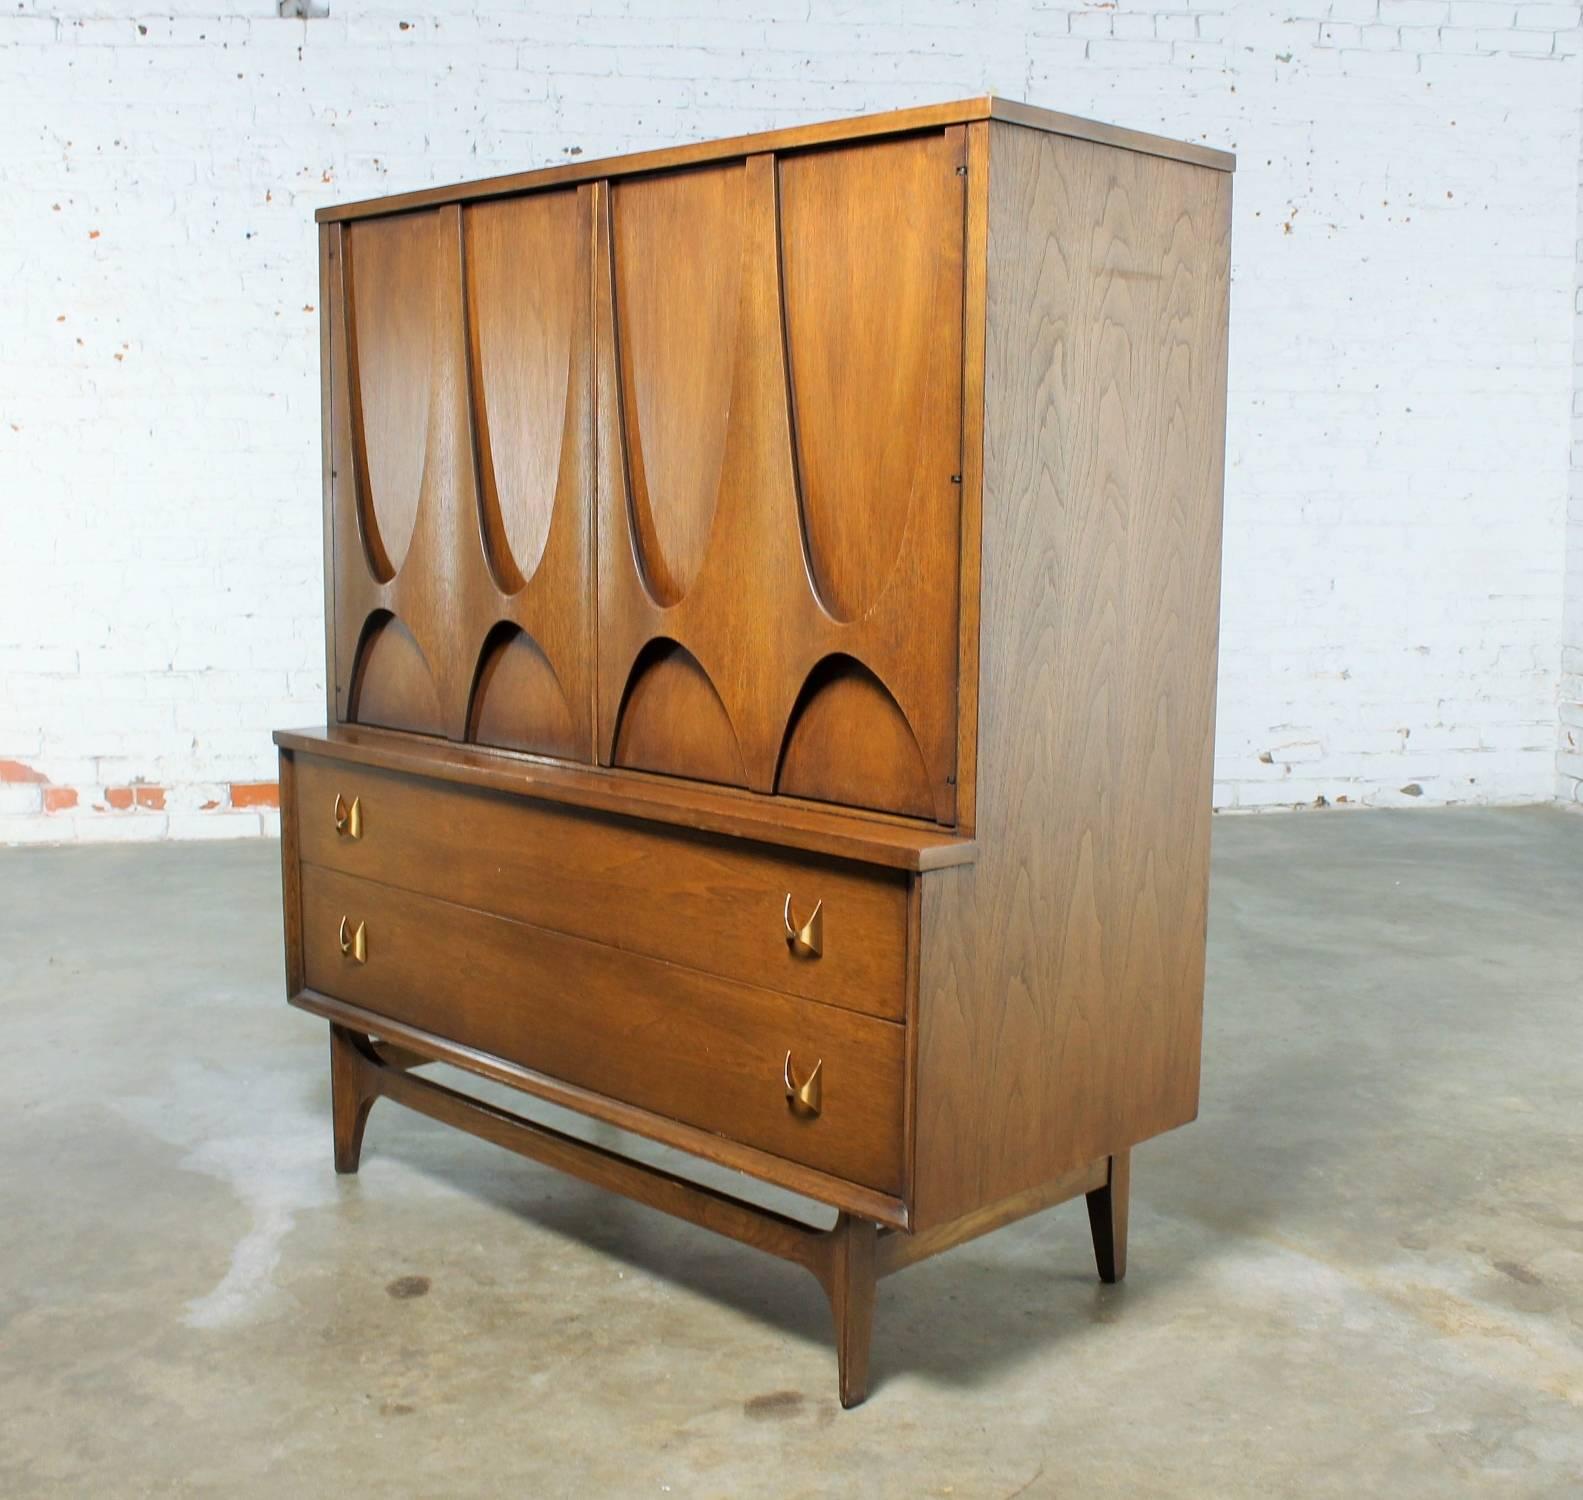 Incredible Mid-Century Modern, 6130-41 walnut door chest or gentleman’s chest from the Brasilia collection by Broyhill Premier. This chest is beautiful original condition.

We stumbled across some marvellous pieces from the Broyhill Premier